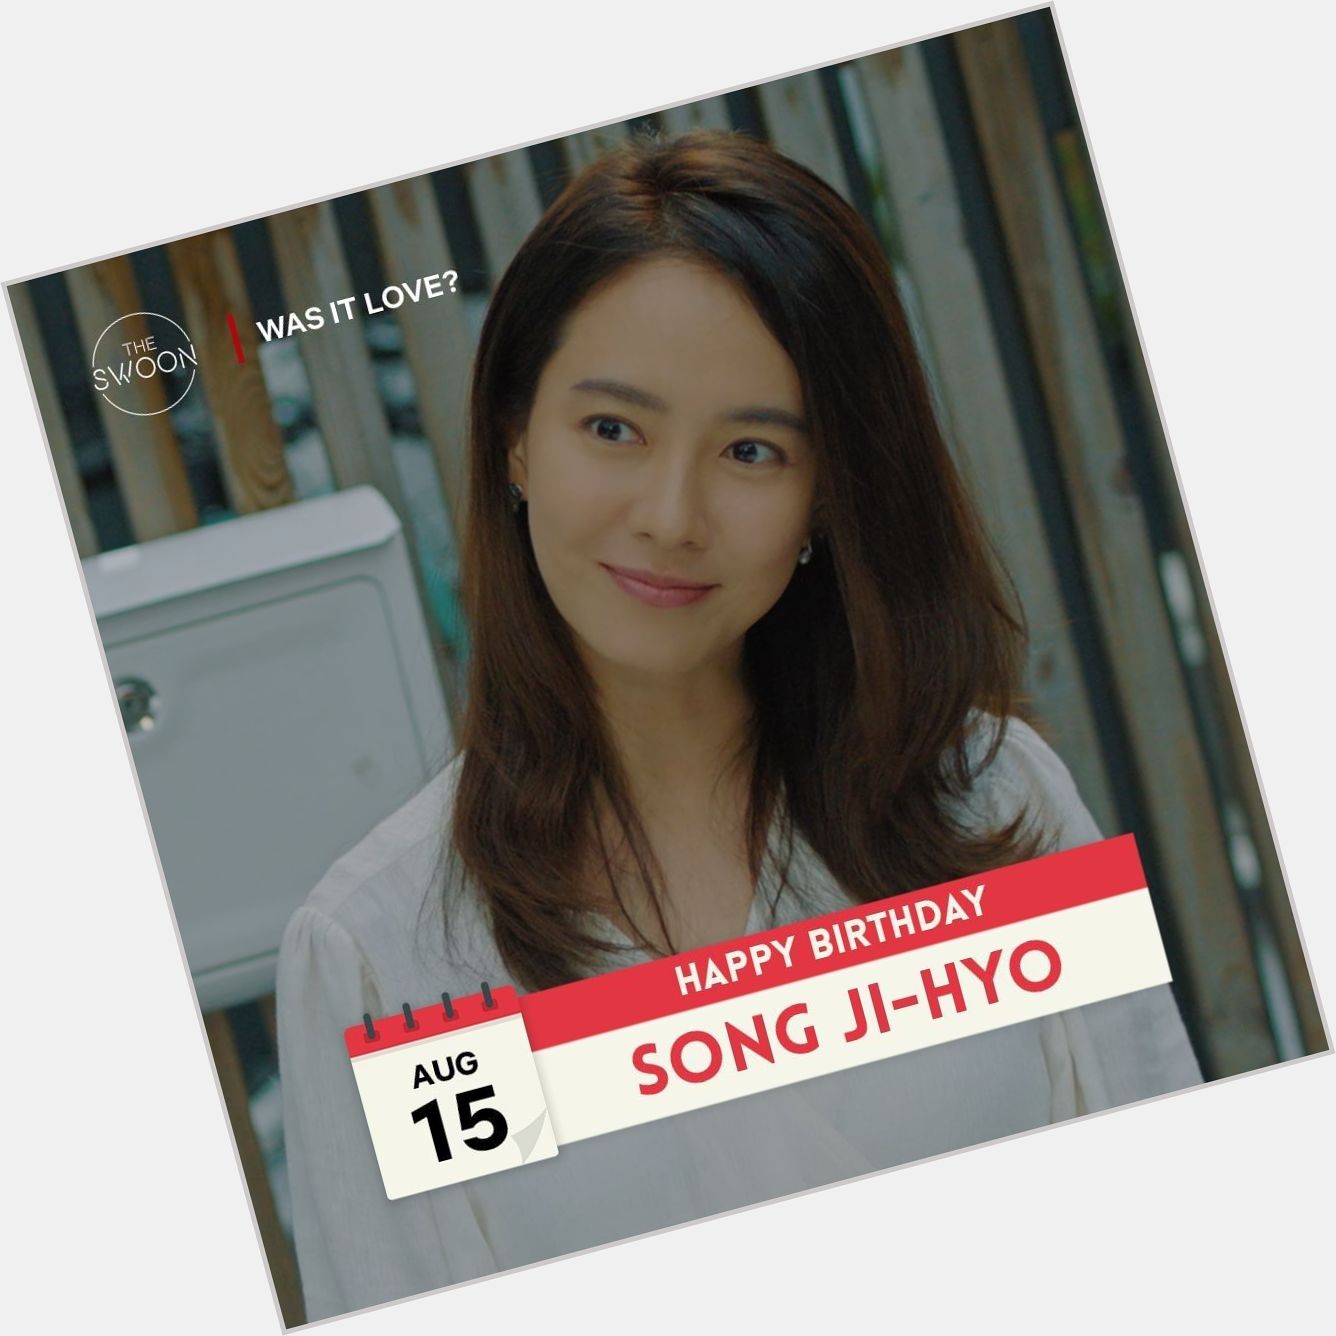 Swoon birthday greeting

\"Happy Birthday to the beautiful and hilarious Song Ji-hyo!\"  